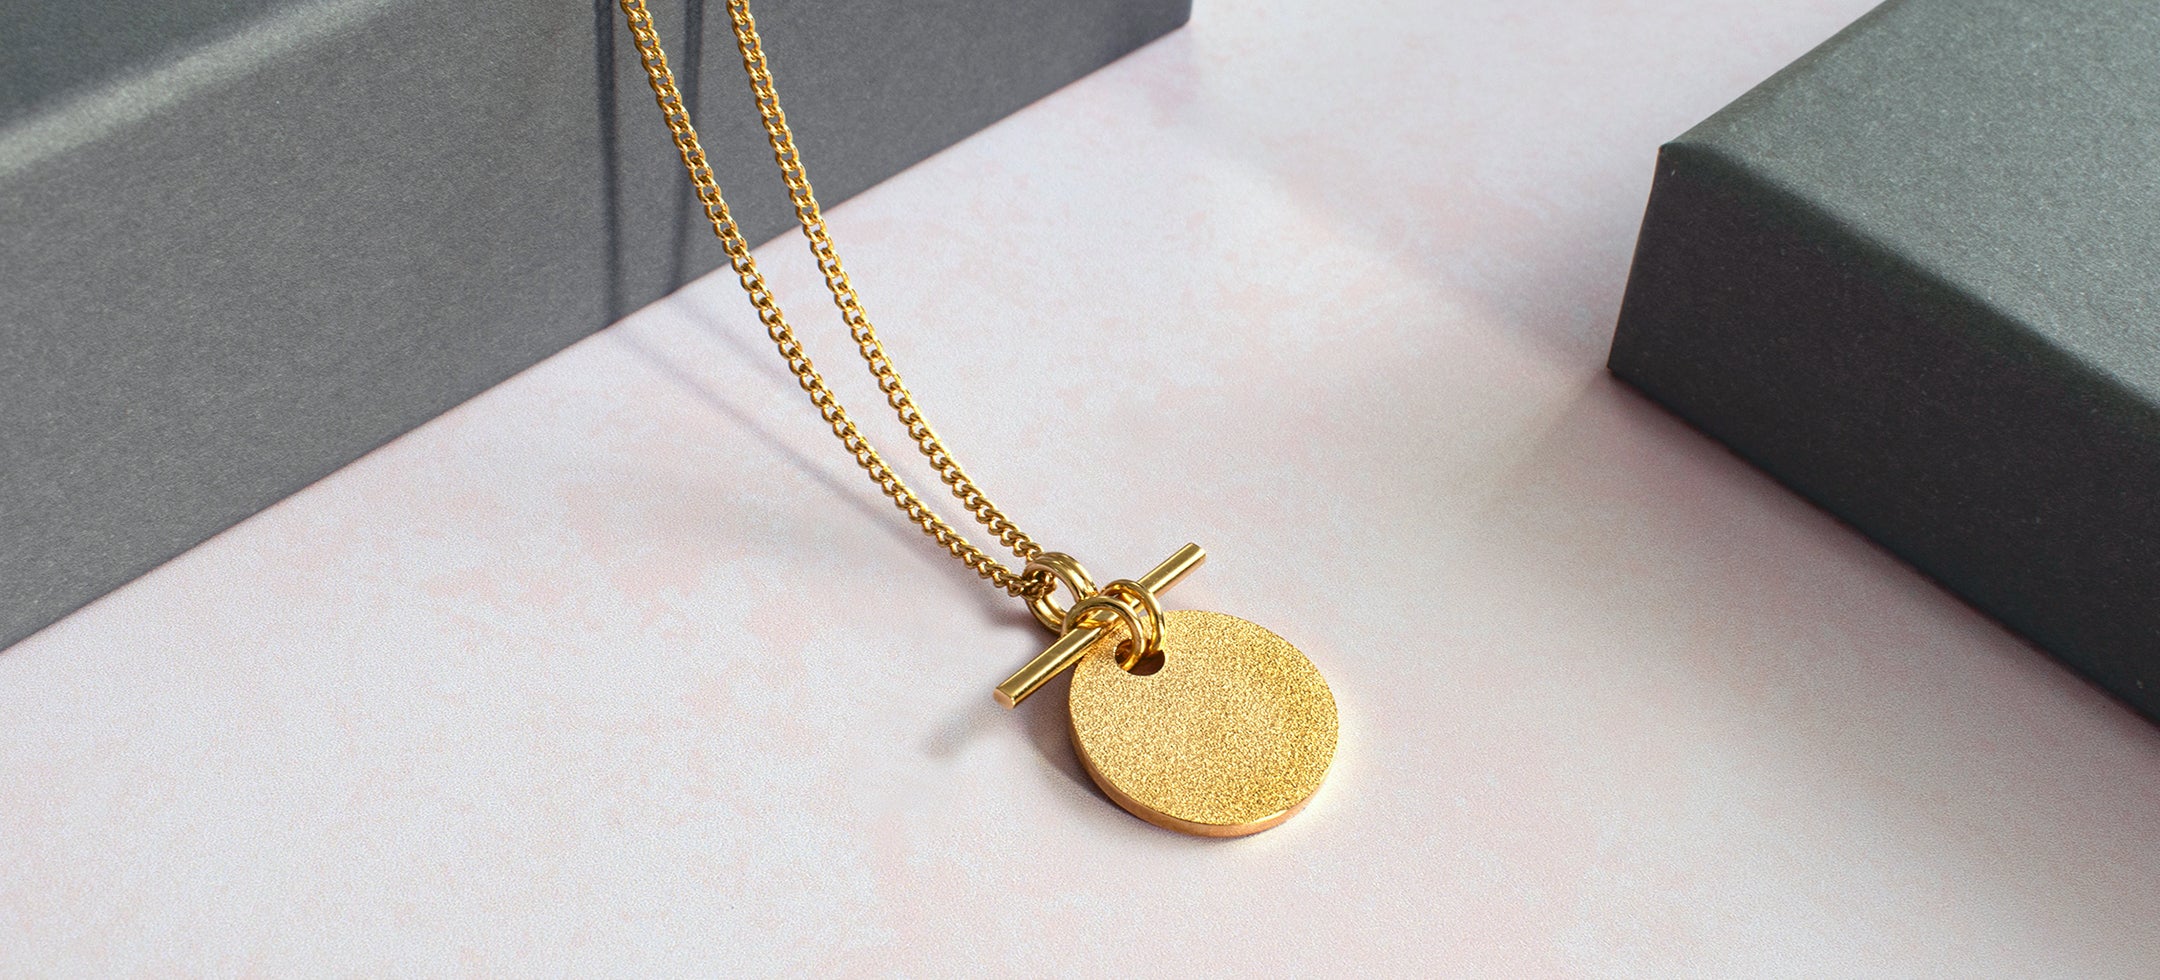 A handmade gold necklace against a grey backdrop